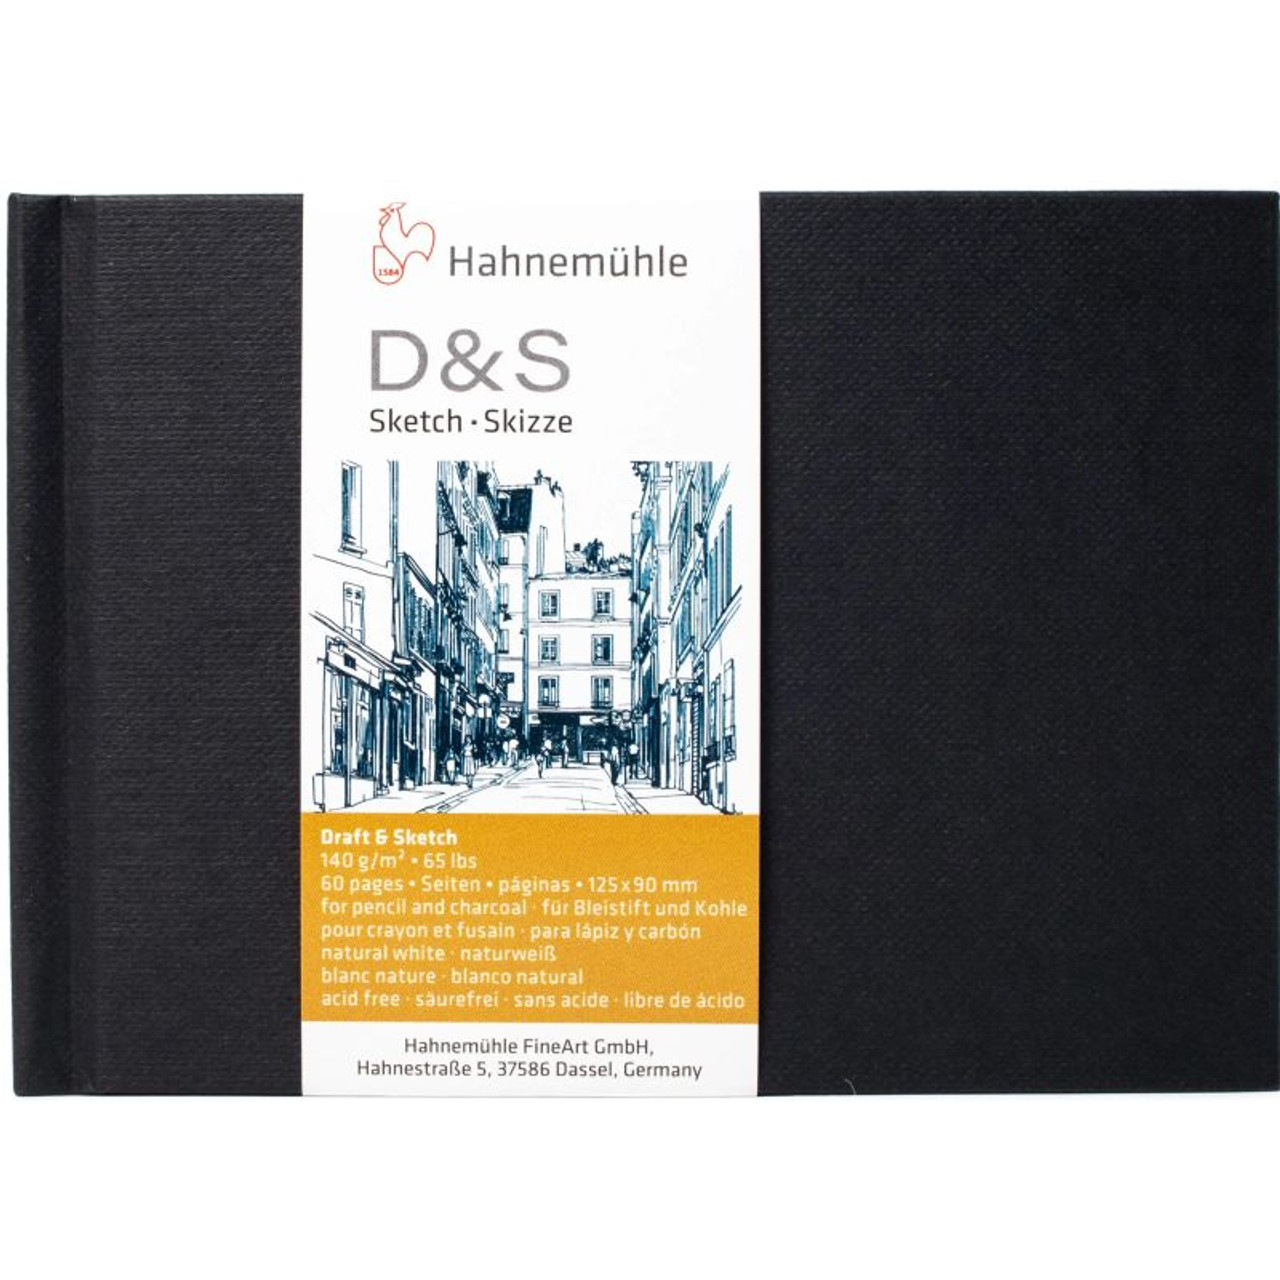 Hahnemuhle Sketch Book D & S, 140gsm Book, Black with Stitched Binding, A6 Portrait